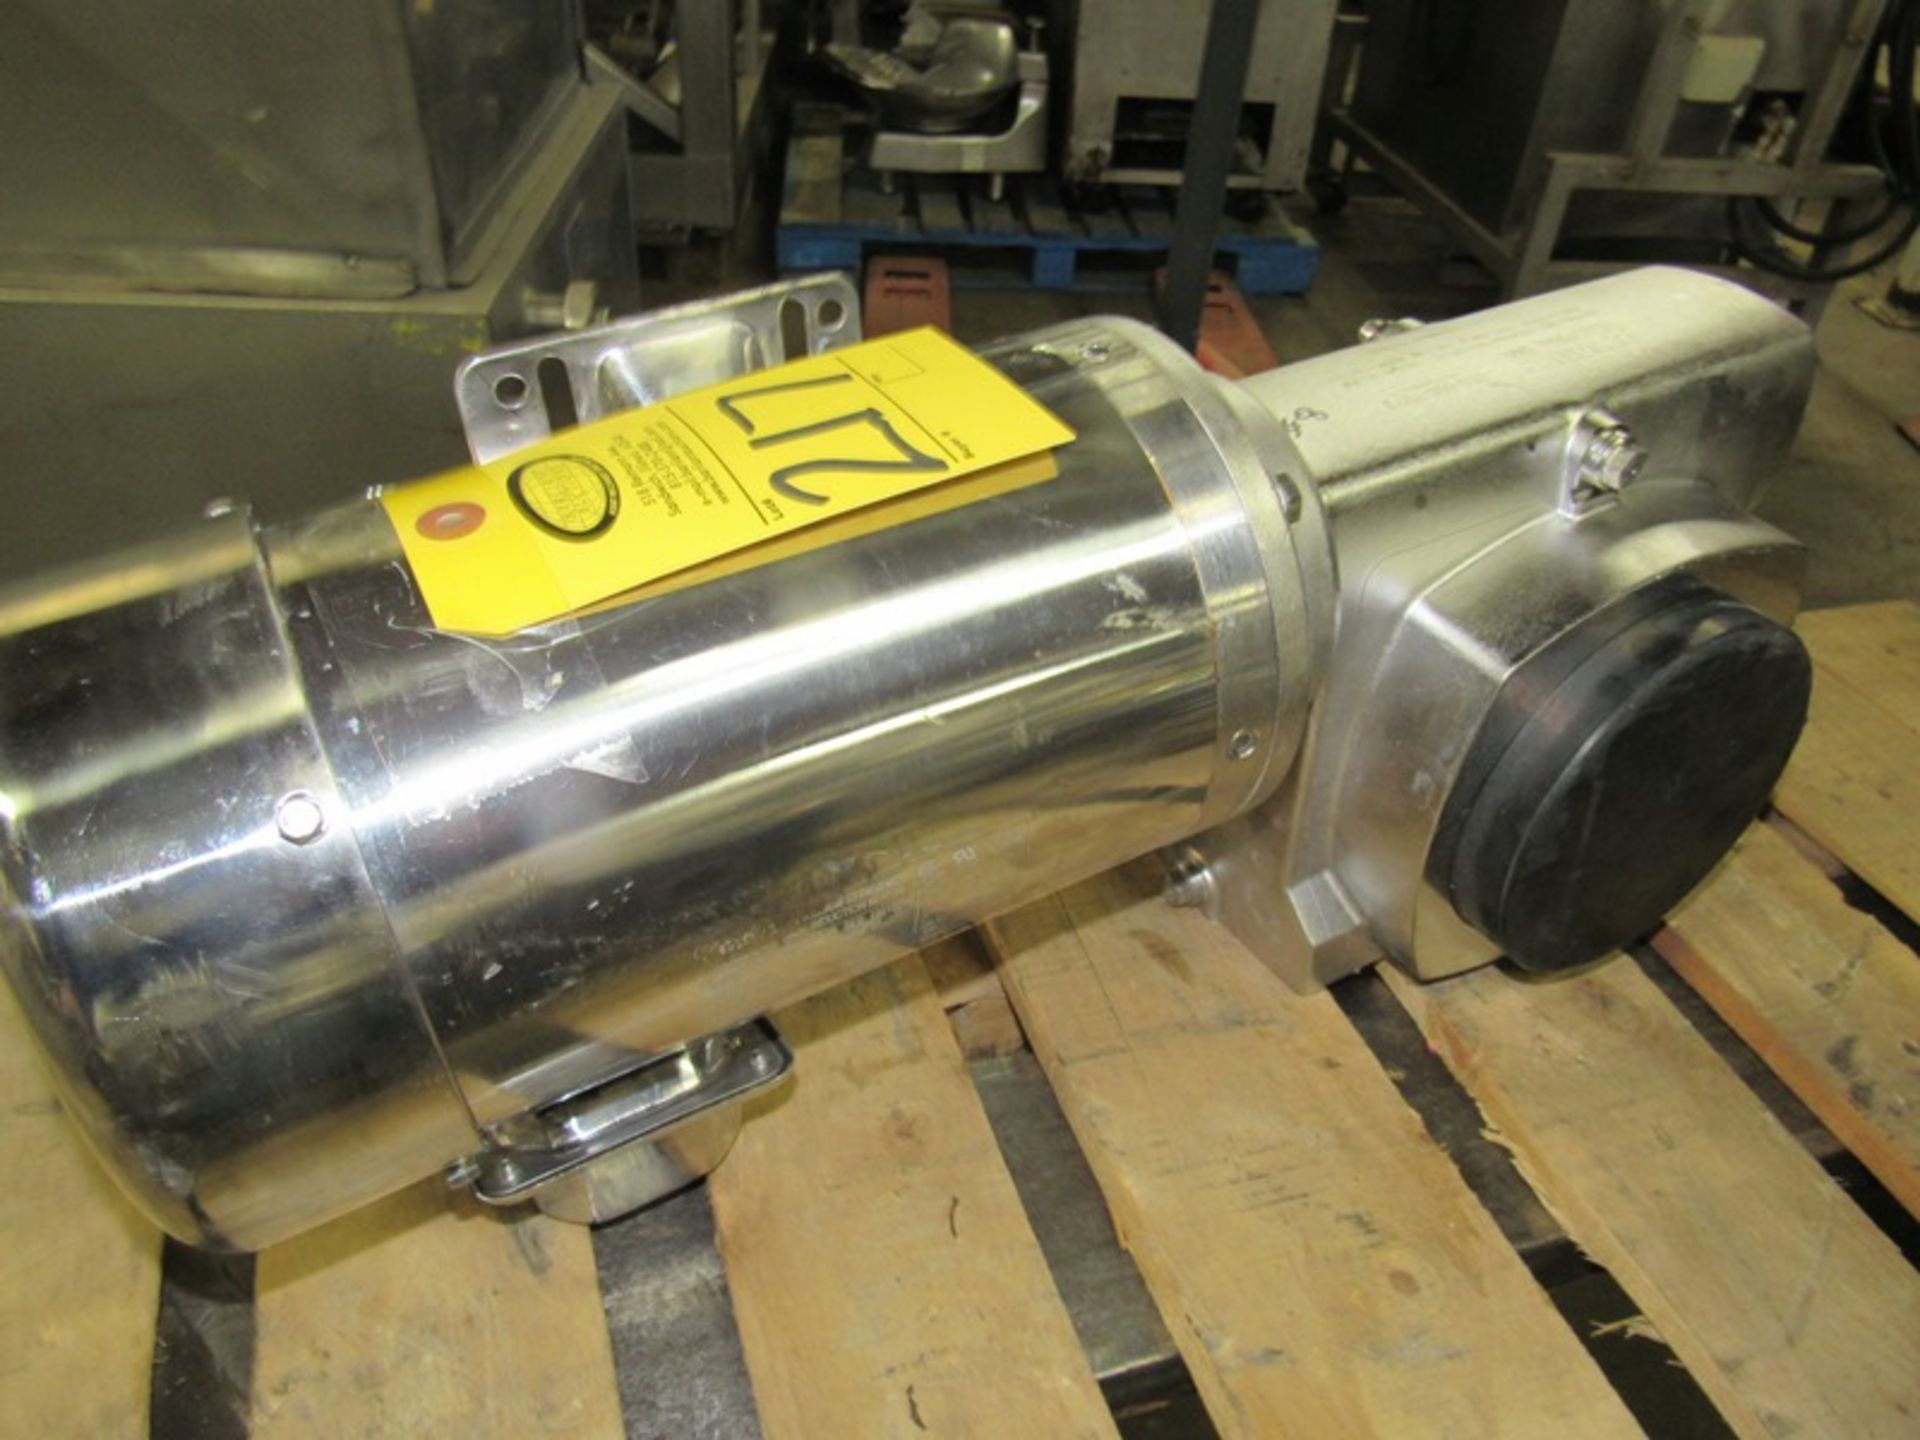 Stainless Steel IDC Premium Motor, frame 56C, 208-230/460 VAC, 3 phase, RPM 1735 HP1, Sterling - Image 2 of 2